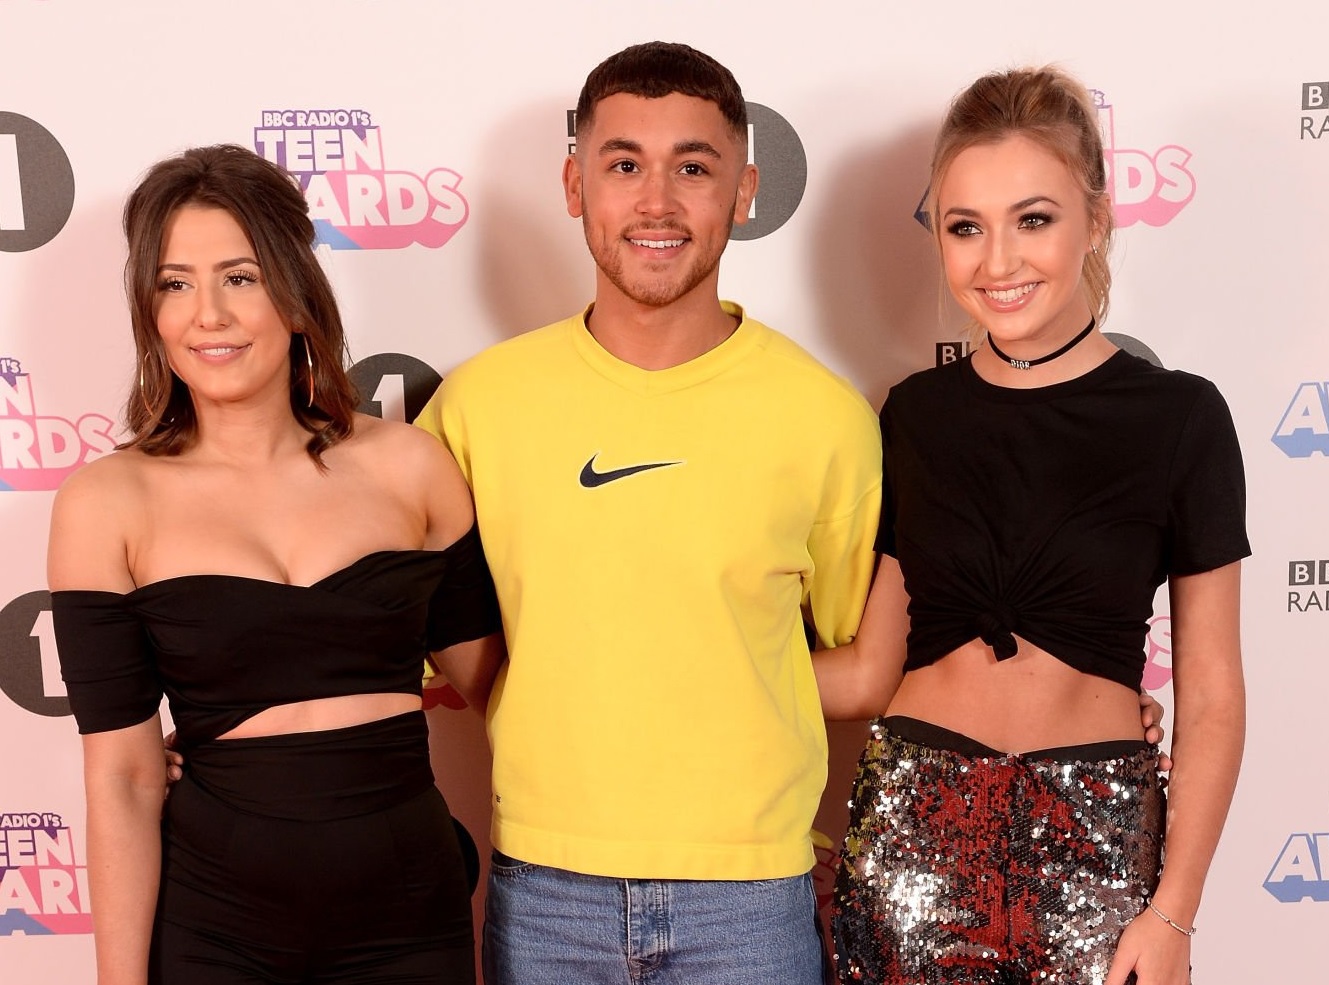 Shaheen Jafargholi and Tilly Keeper attend the BBC Radio 1 Teen Awards 2017 along with Jasmine Armfield